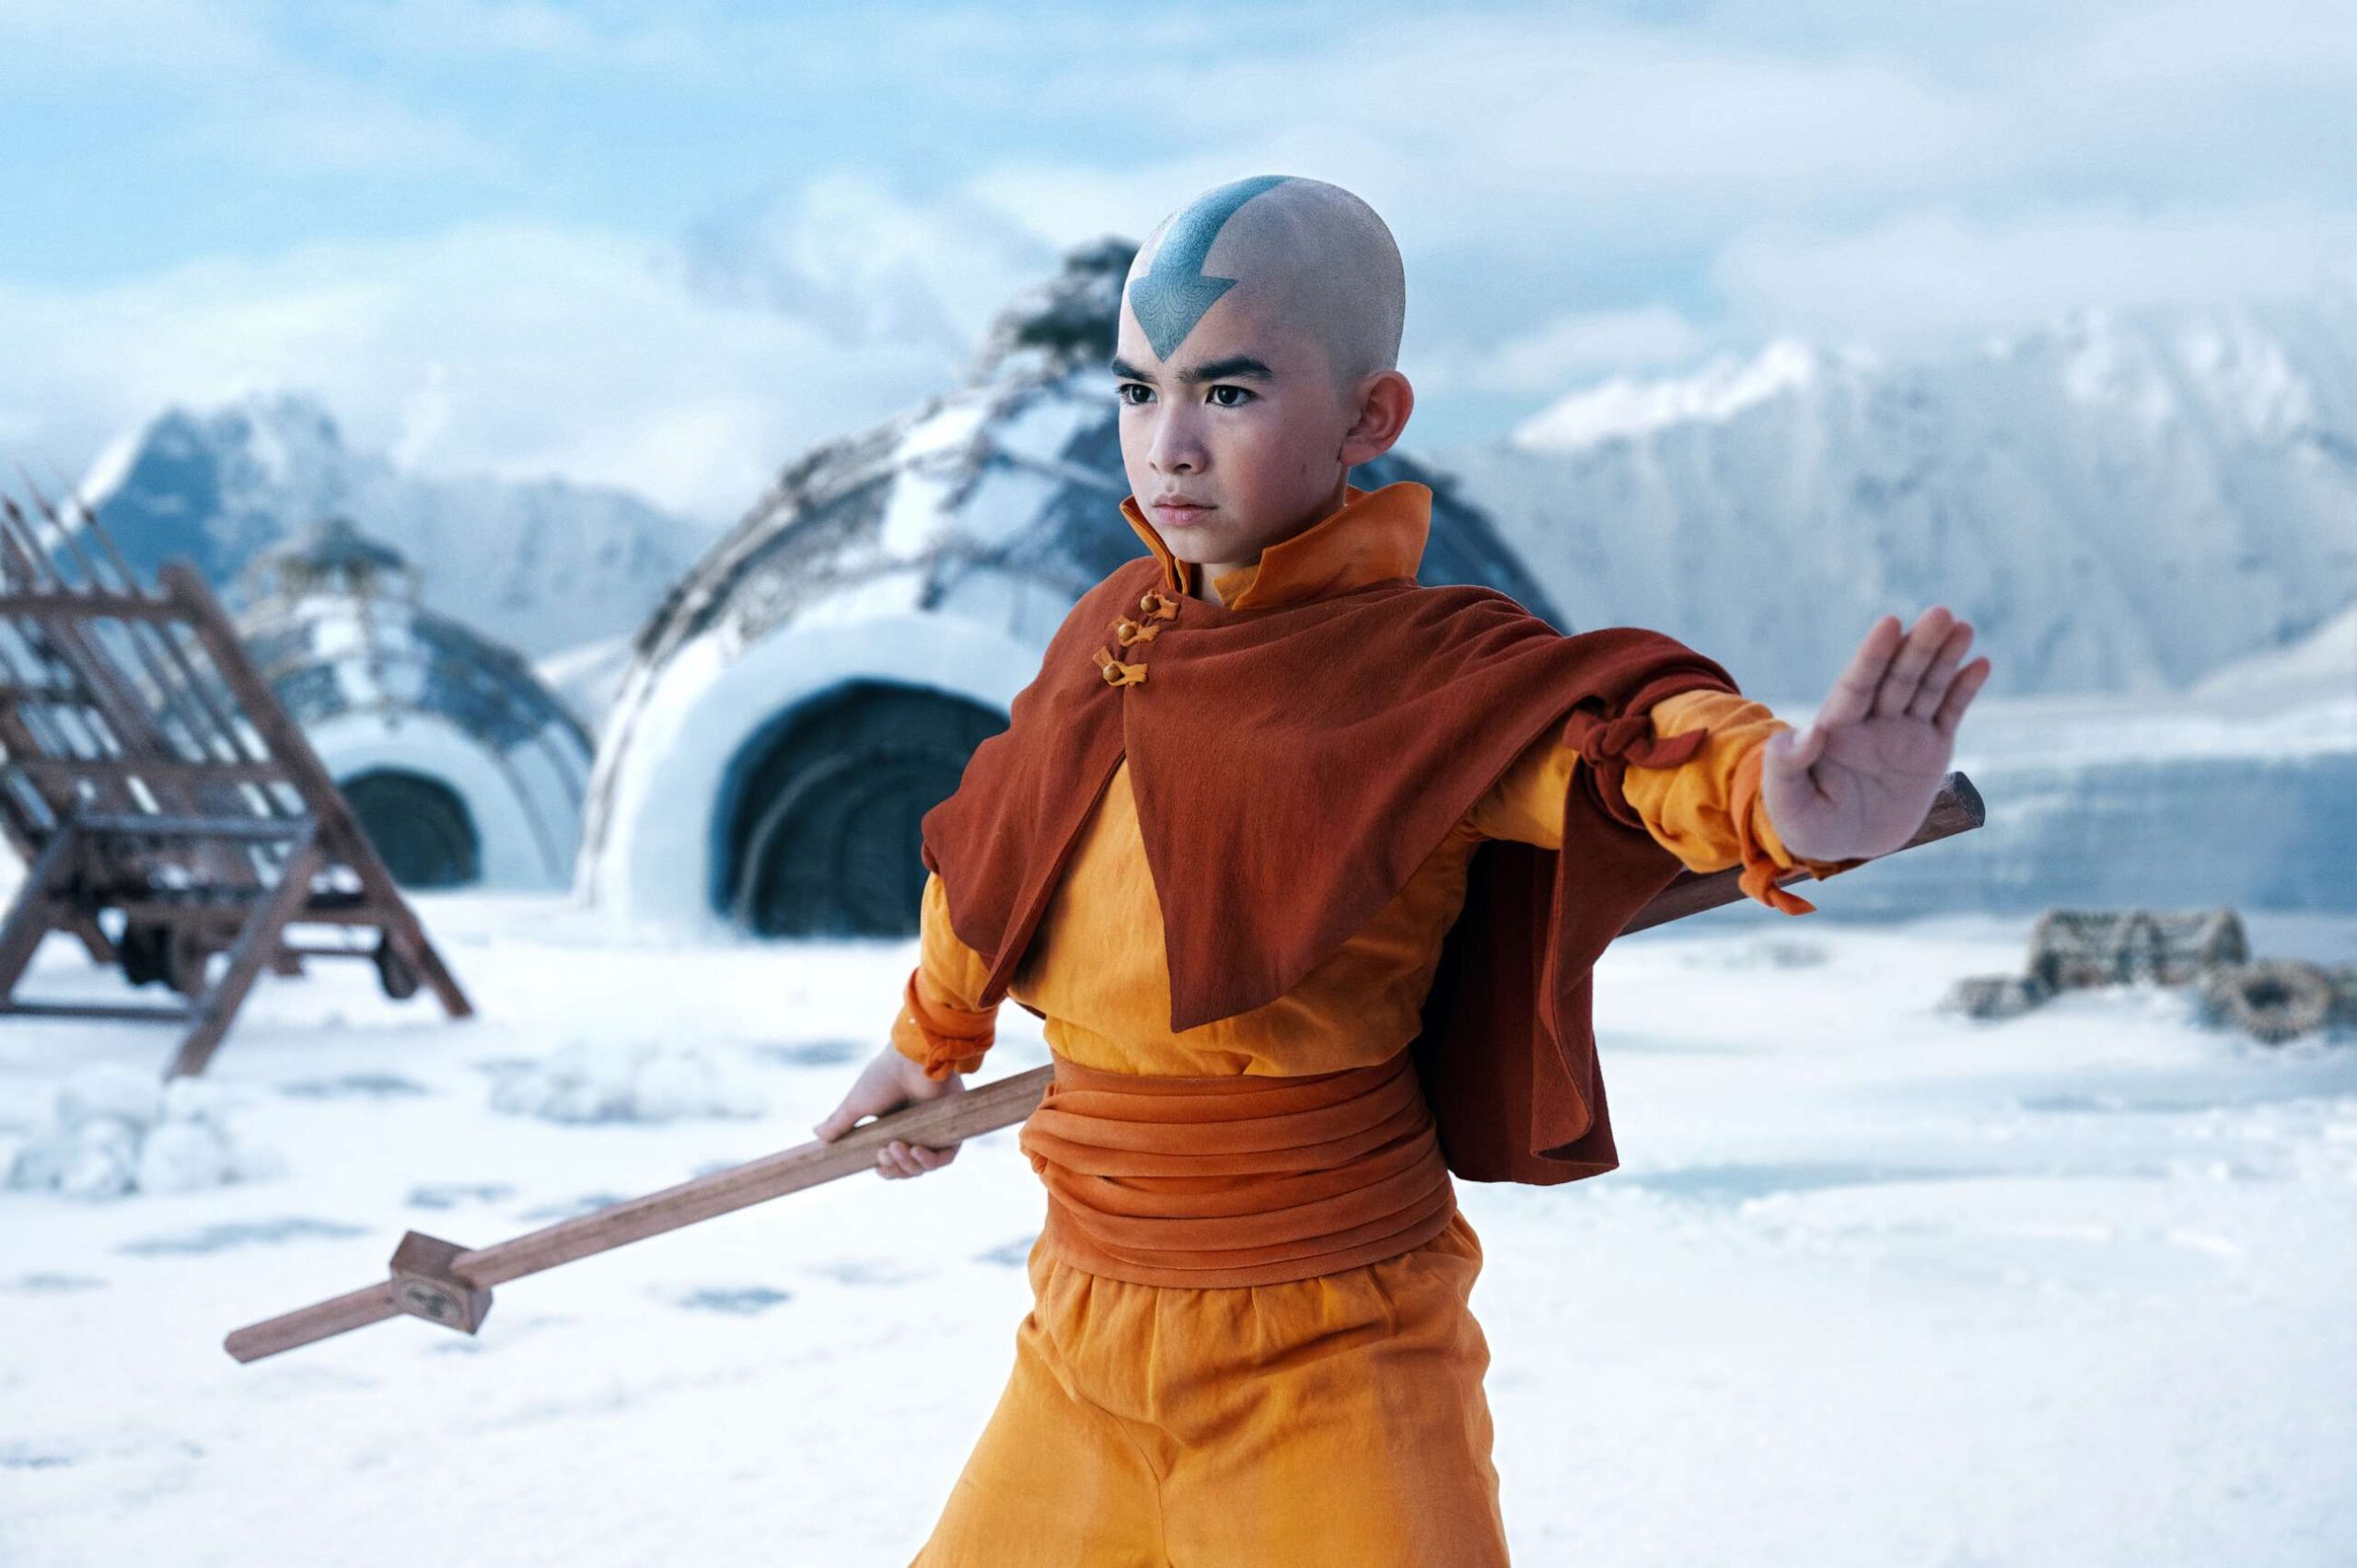 Netflix Releases New Pictures for the Live-Action Series Avatar: The Last Airbender